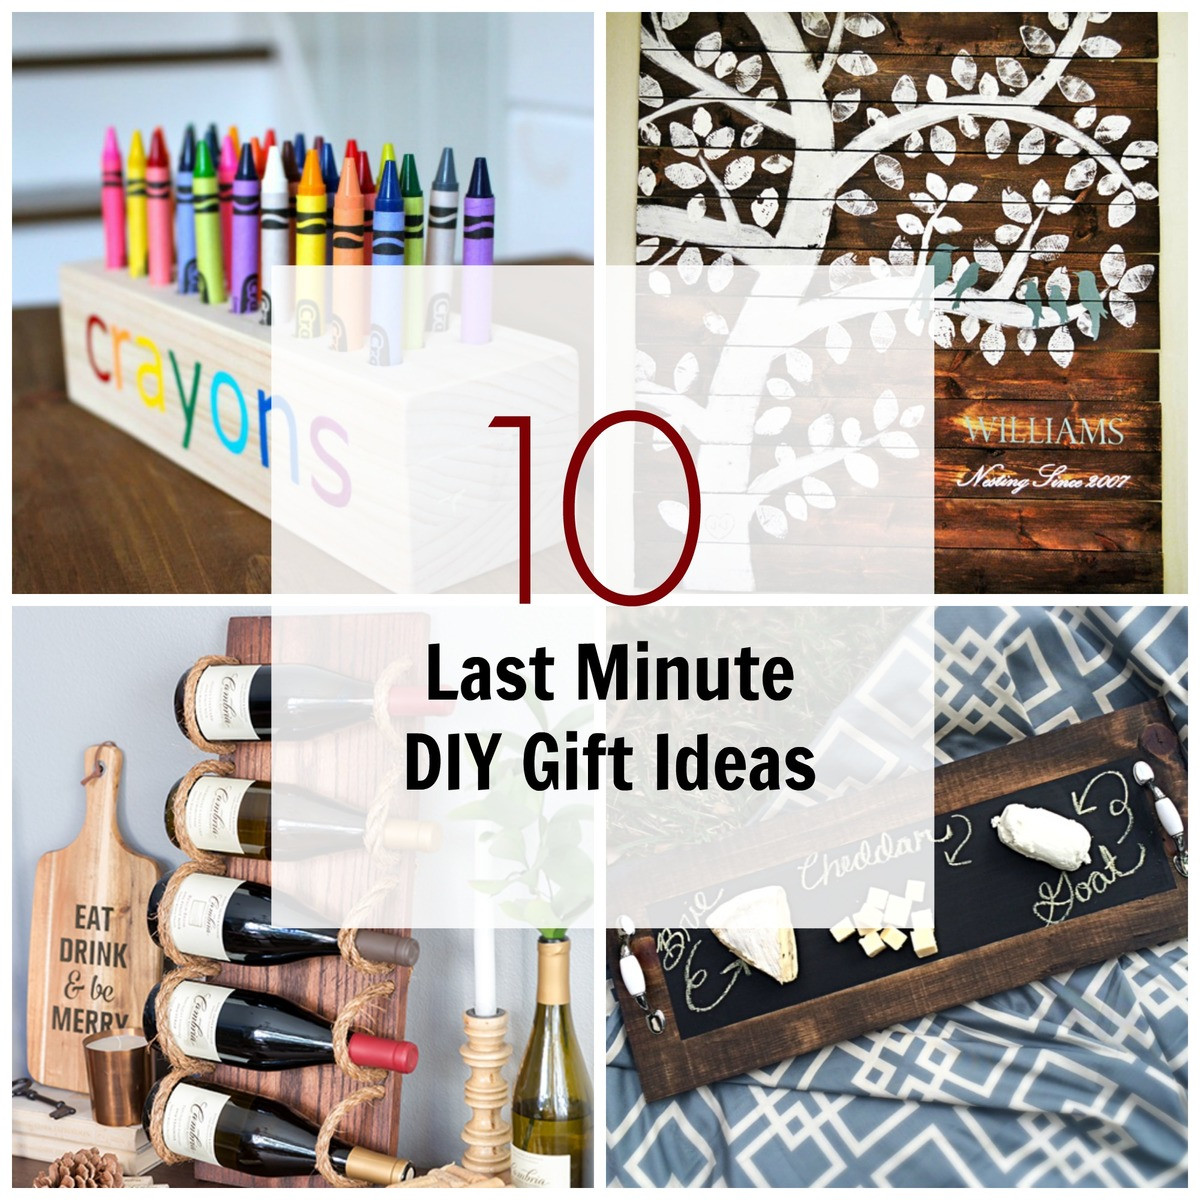 DIY Woodworking Christmas Gifts
 10 Last Minute DIY Wood Gifts that you Can Make